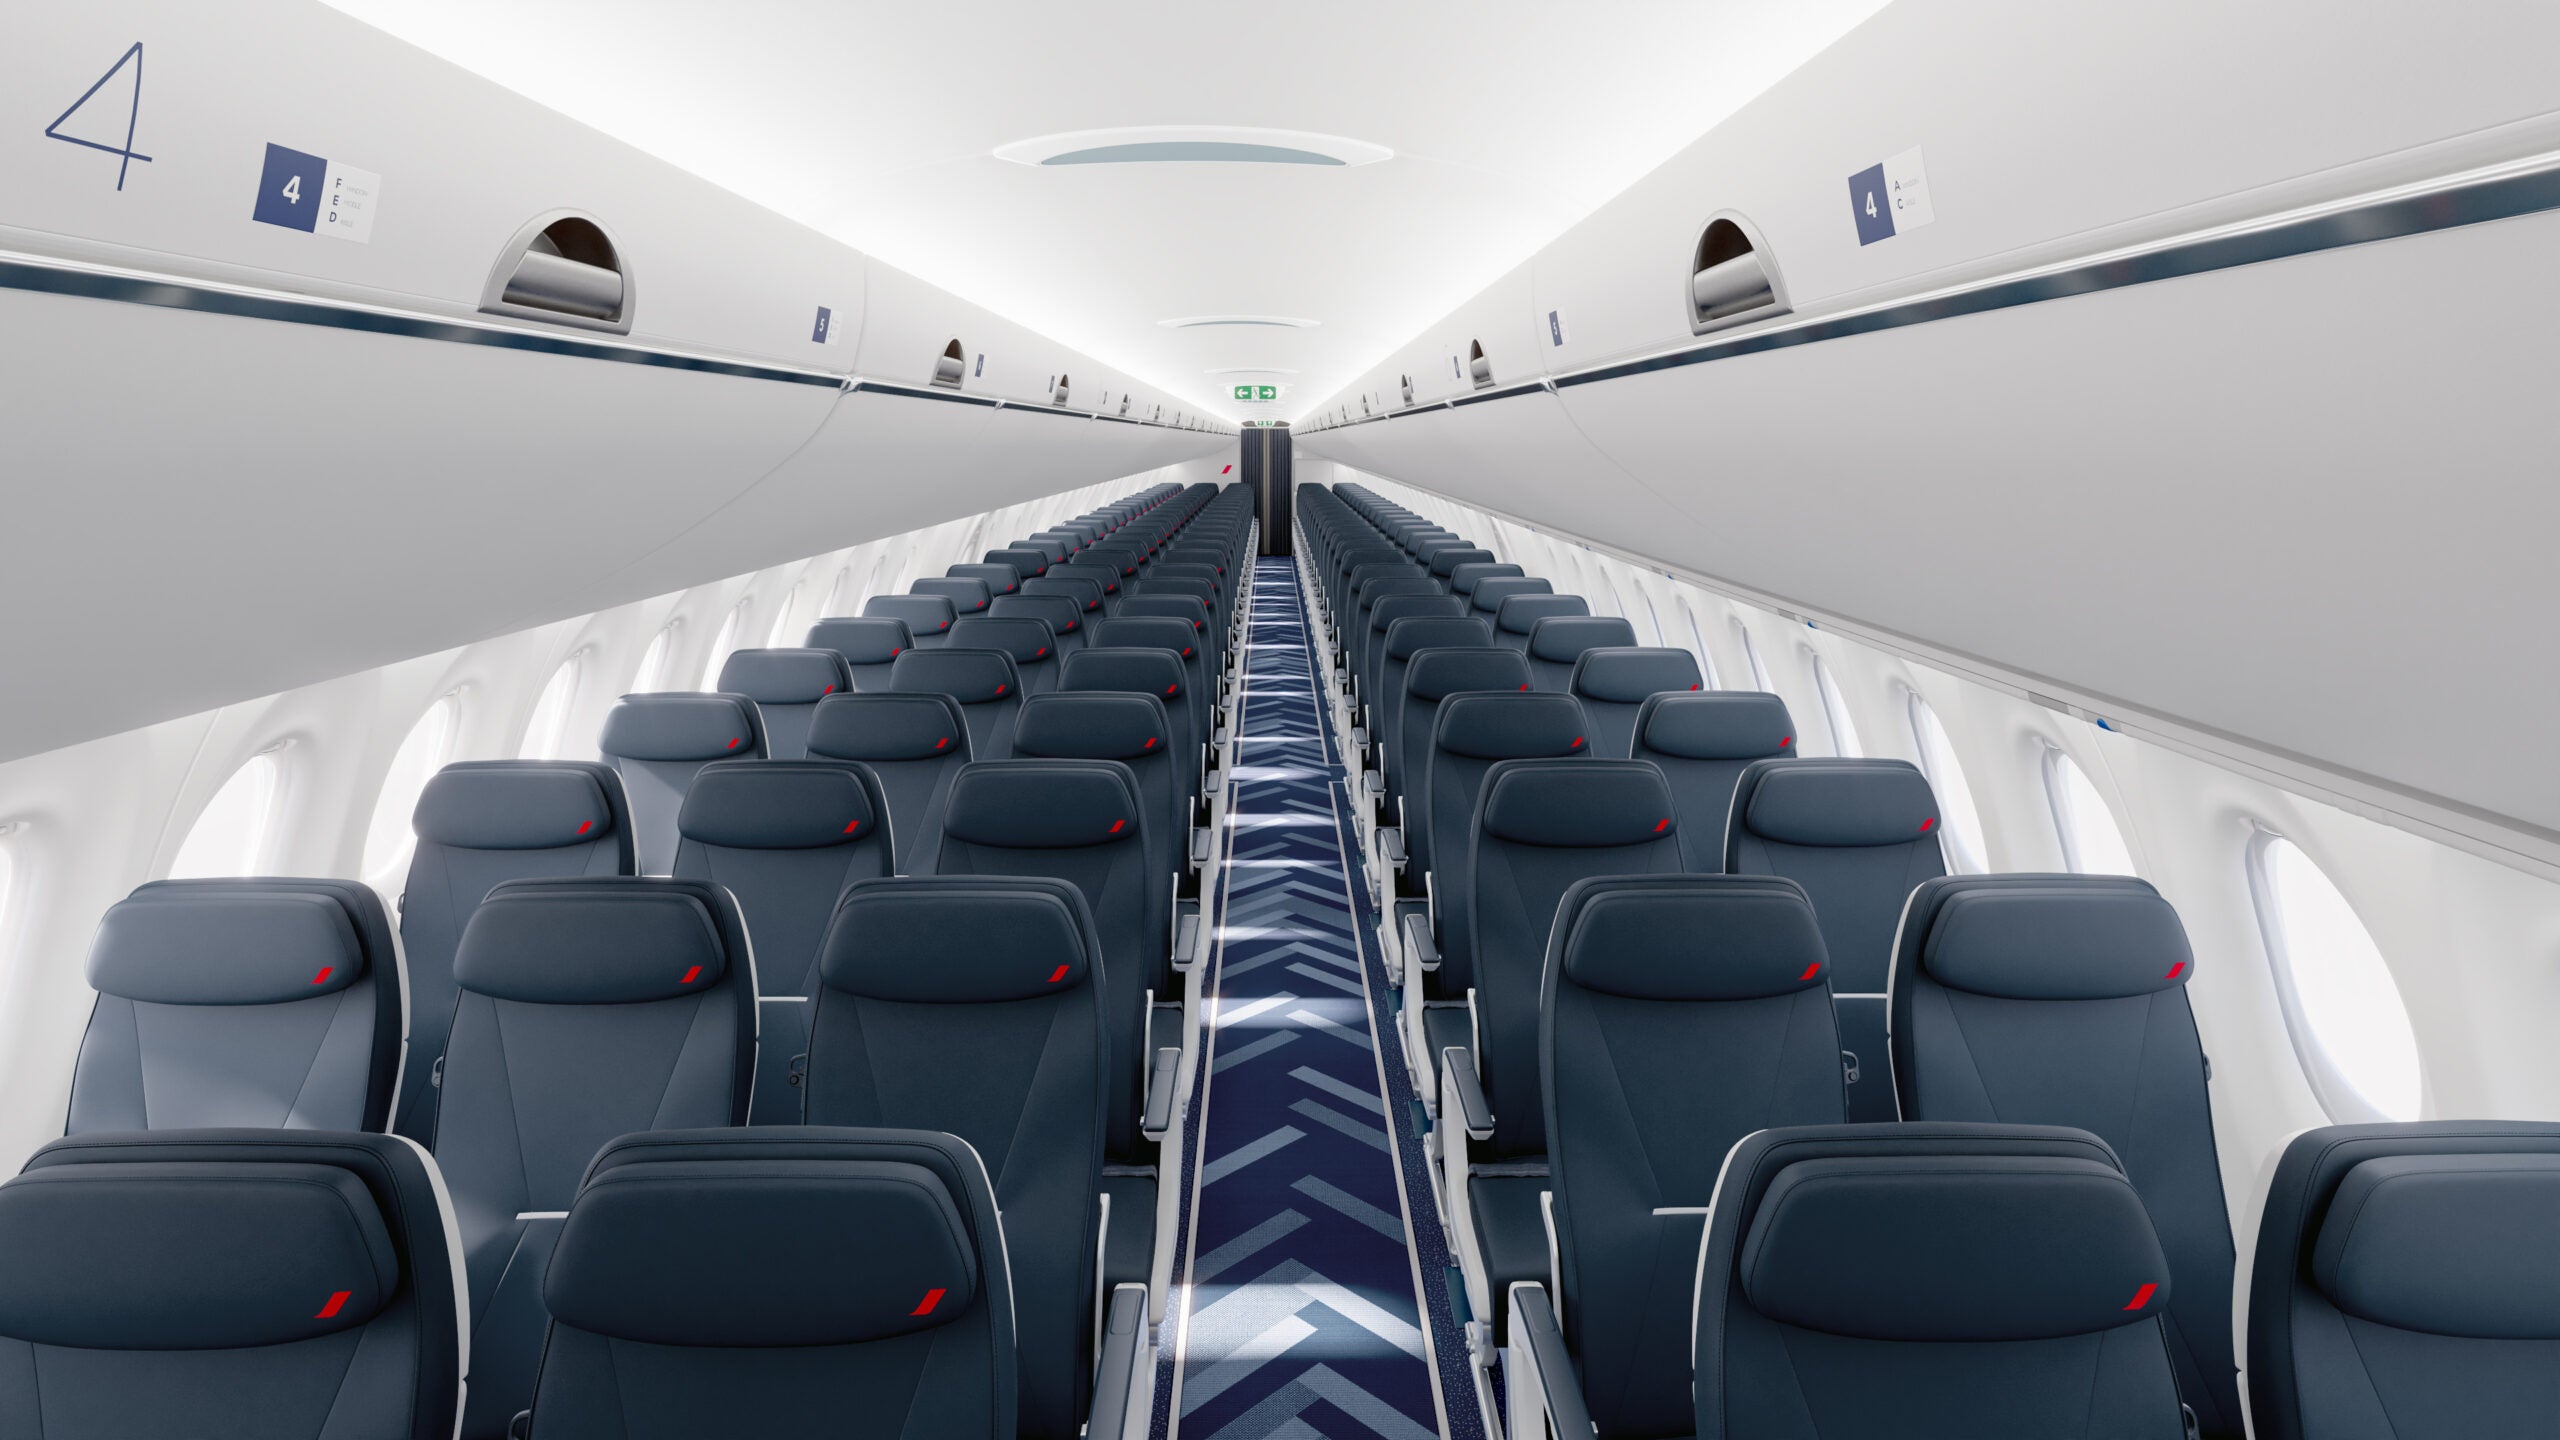 The inside of Air France's new Airbus A220-300 aircraft (photo courtesy of Air France)